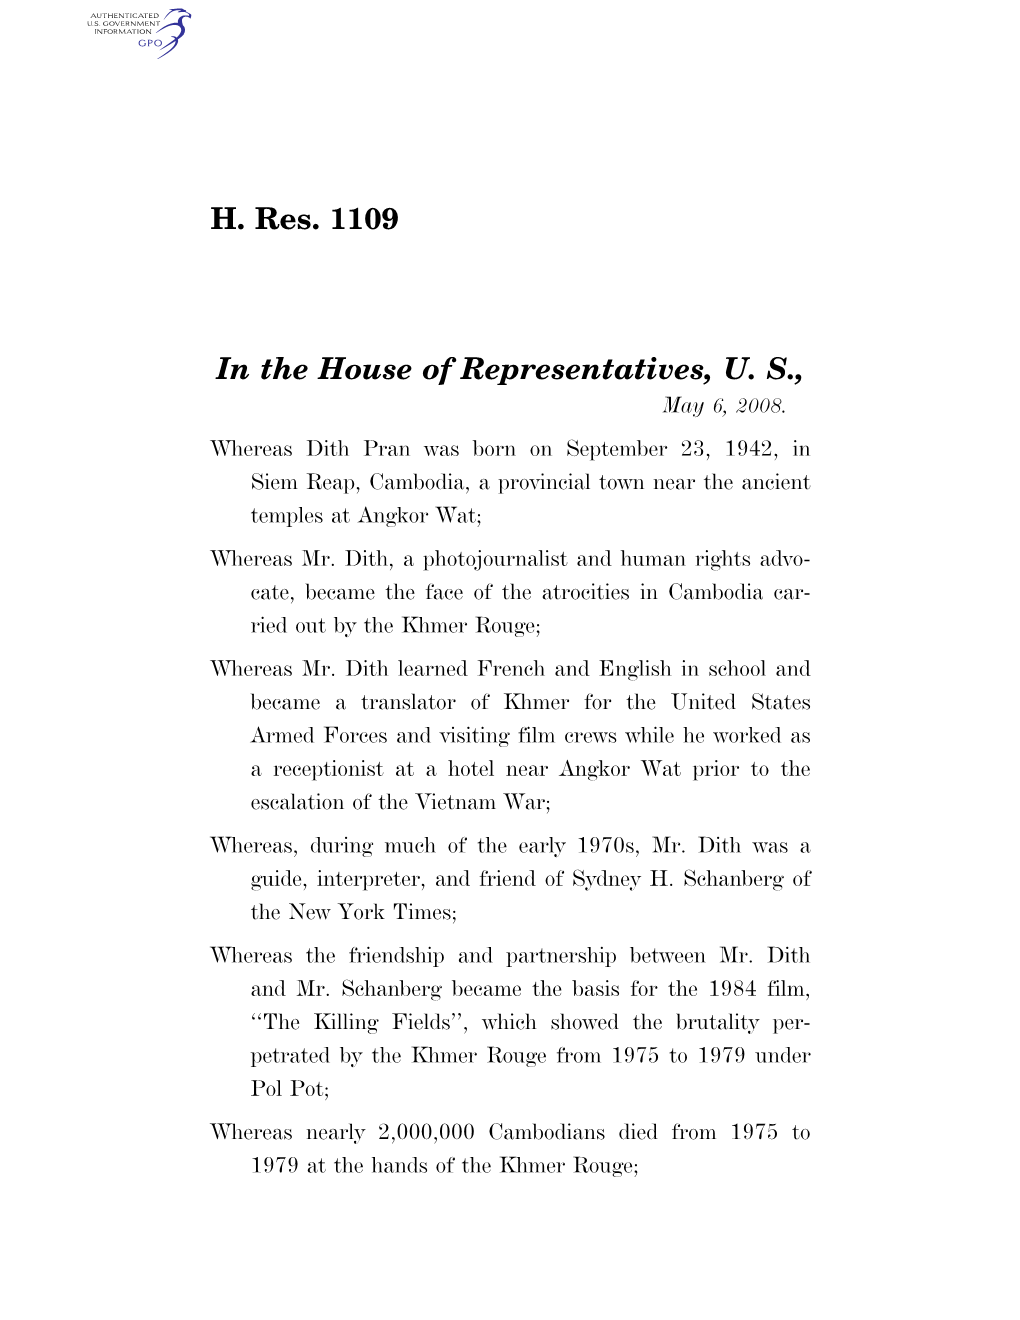 H. Res. 1109 in the House of Representatives, U